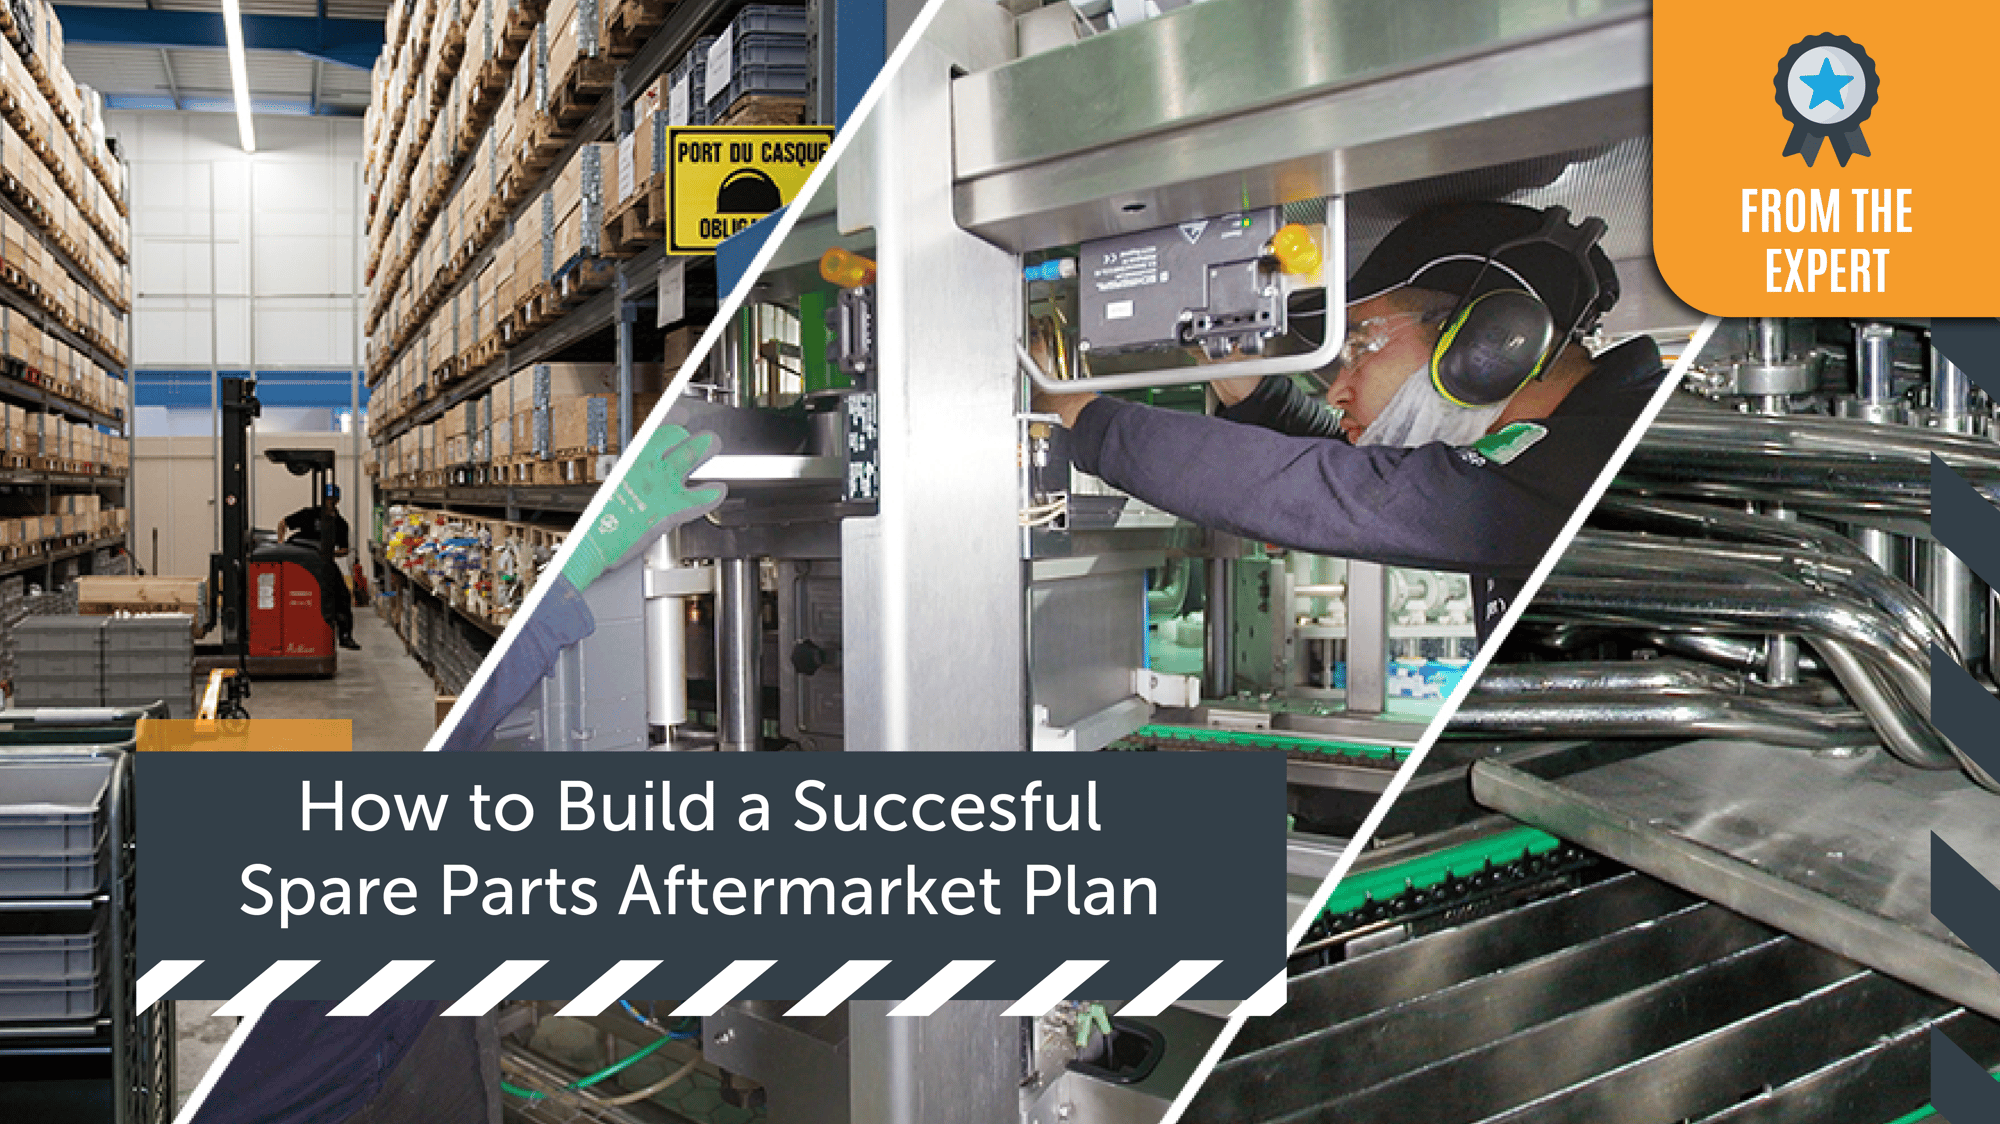 Synerlink Aftermarket Chapter 4 - How to build a Succesful Spare Parts Aftermarket Plan